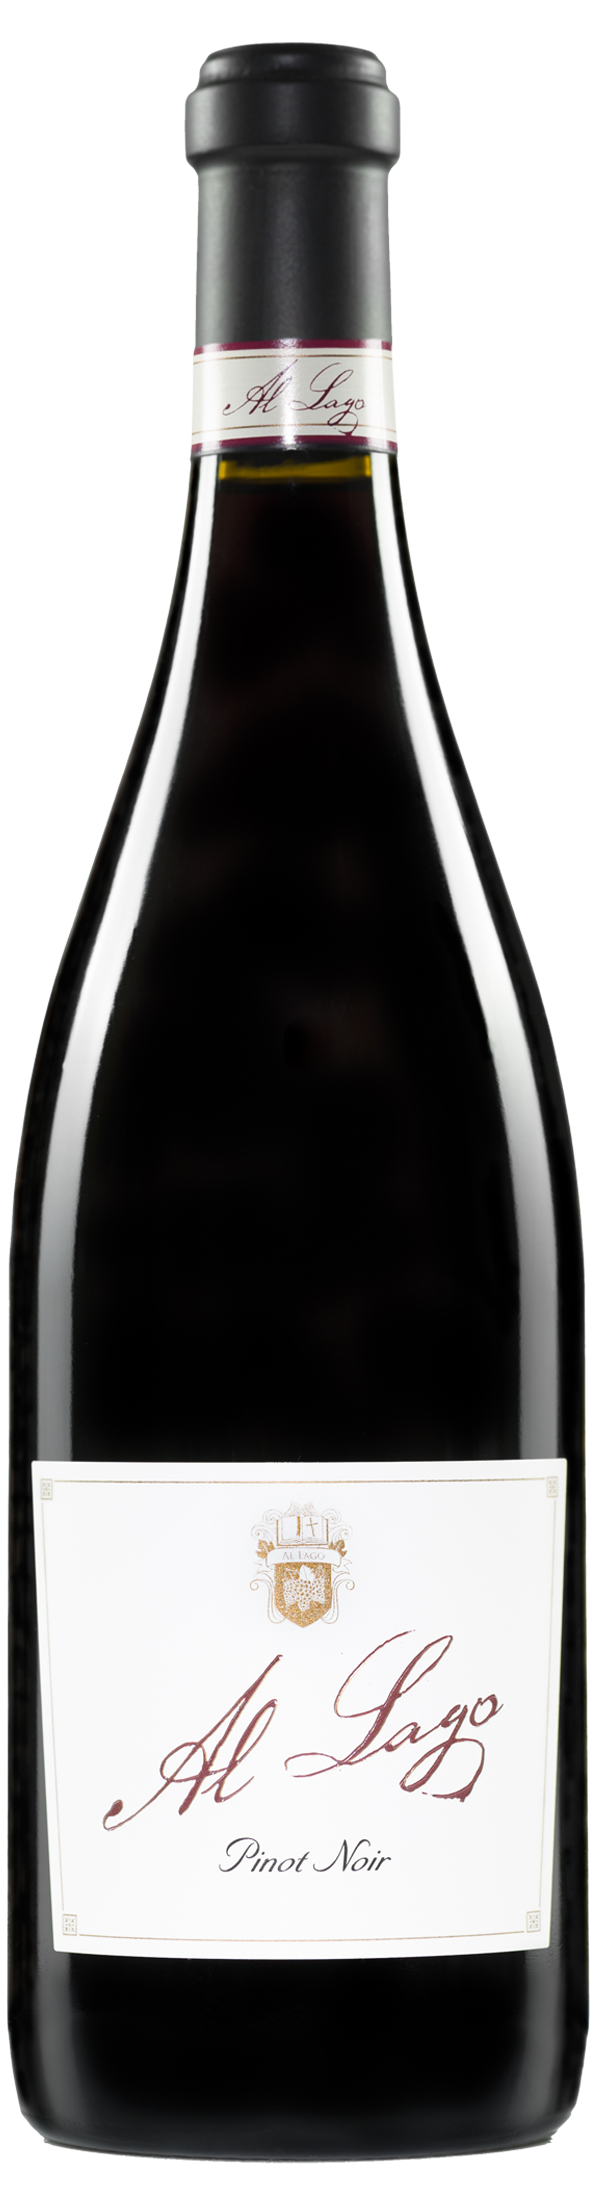 Product Image for 2016 Pinot Noir